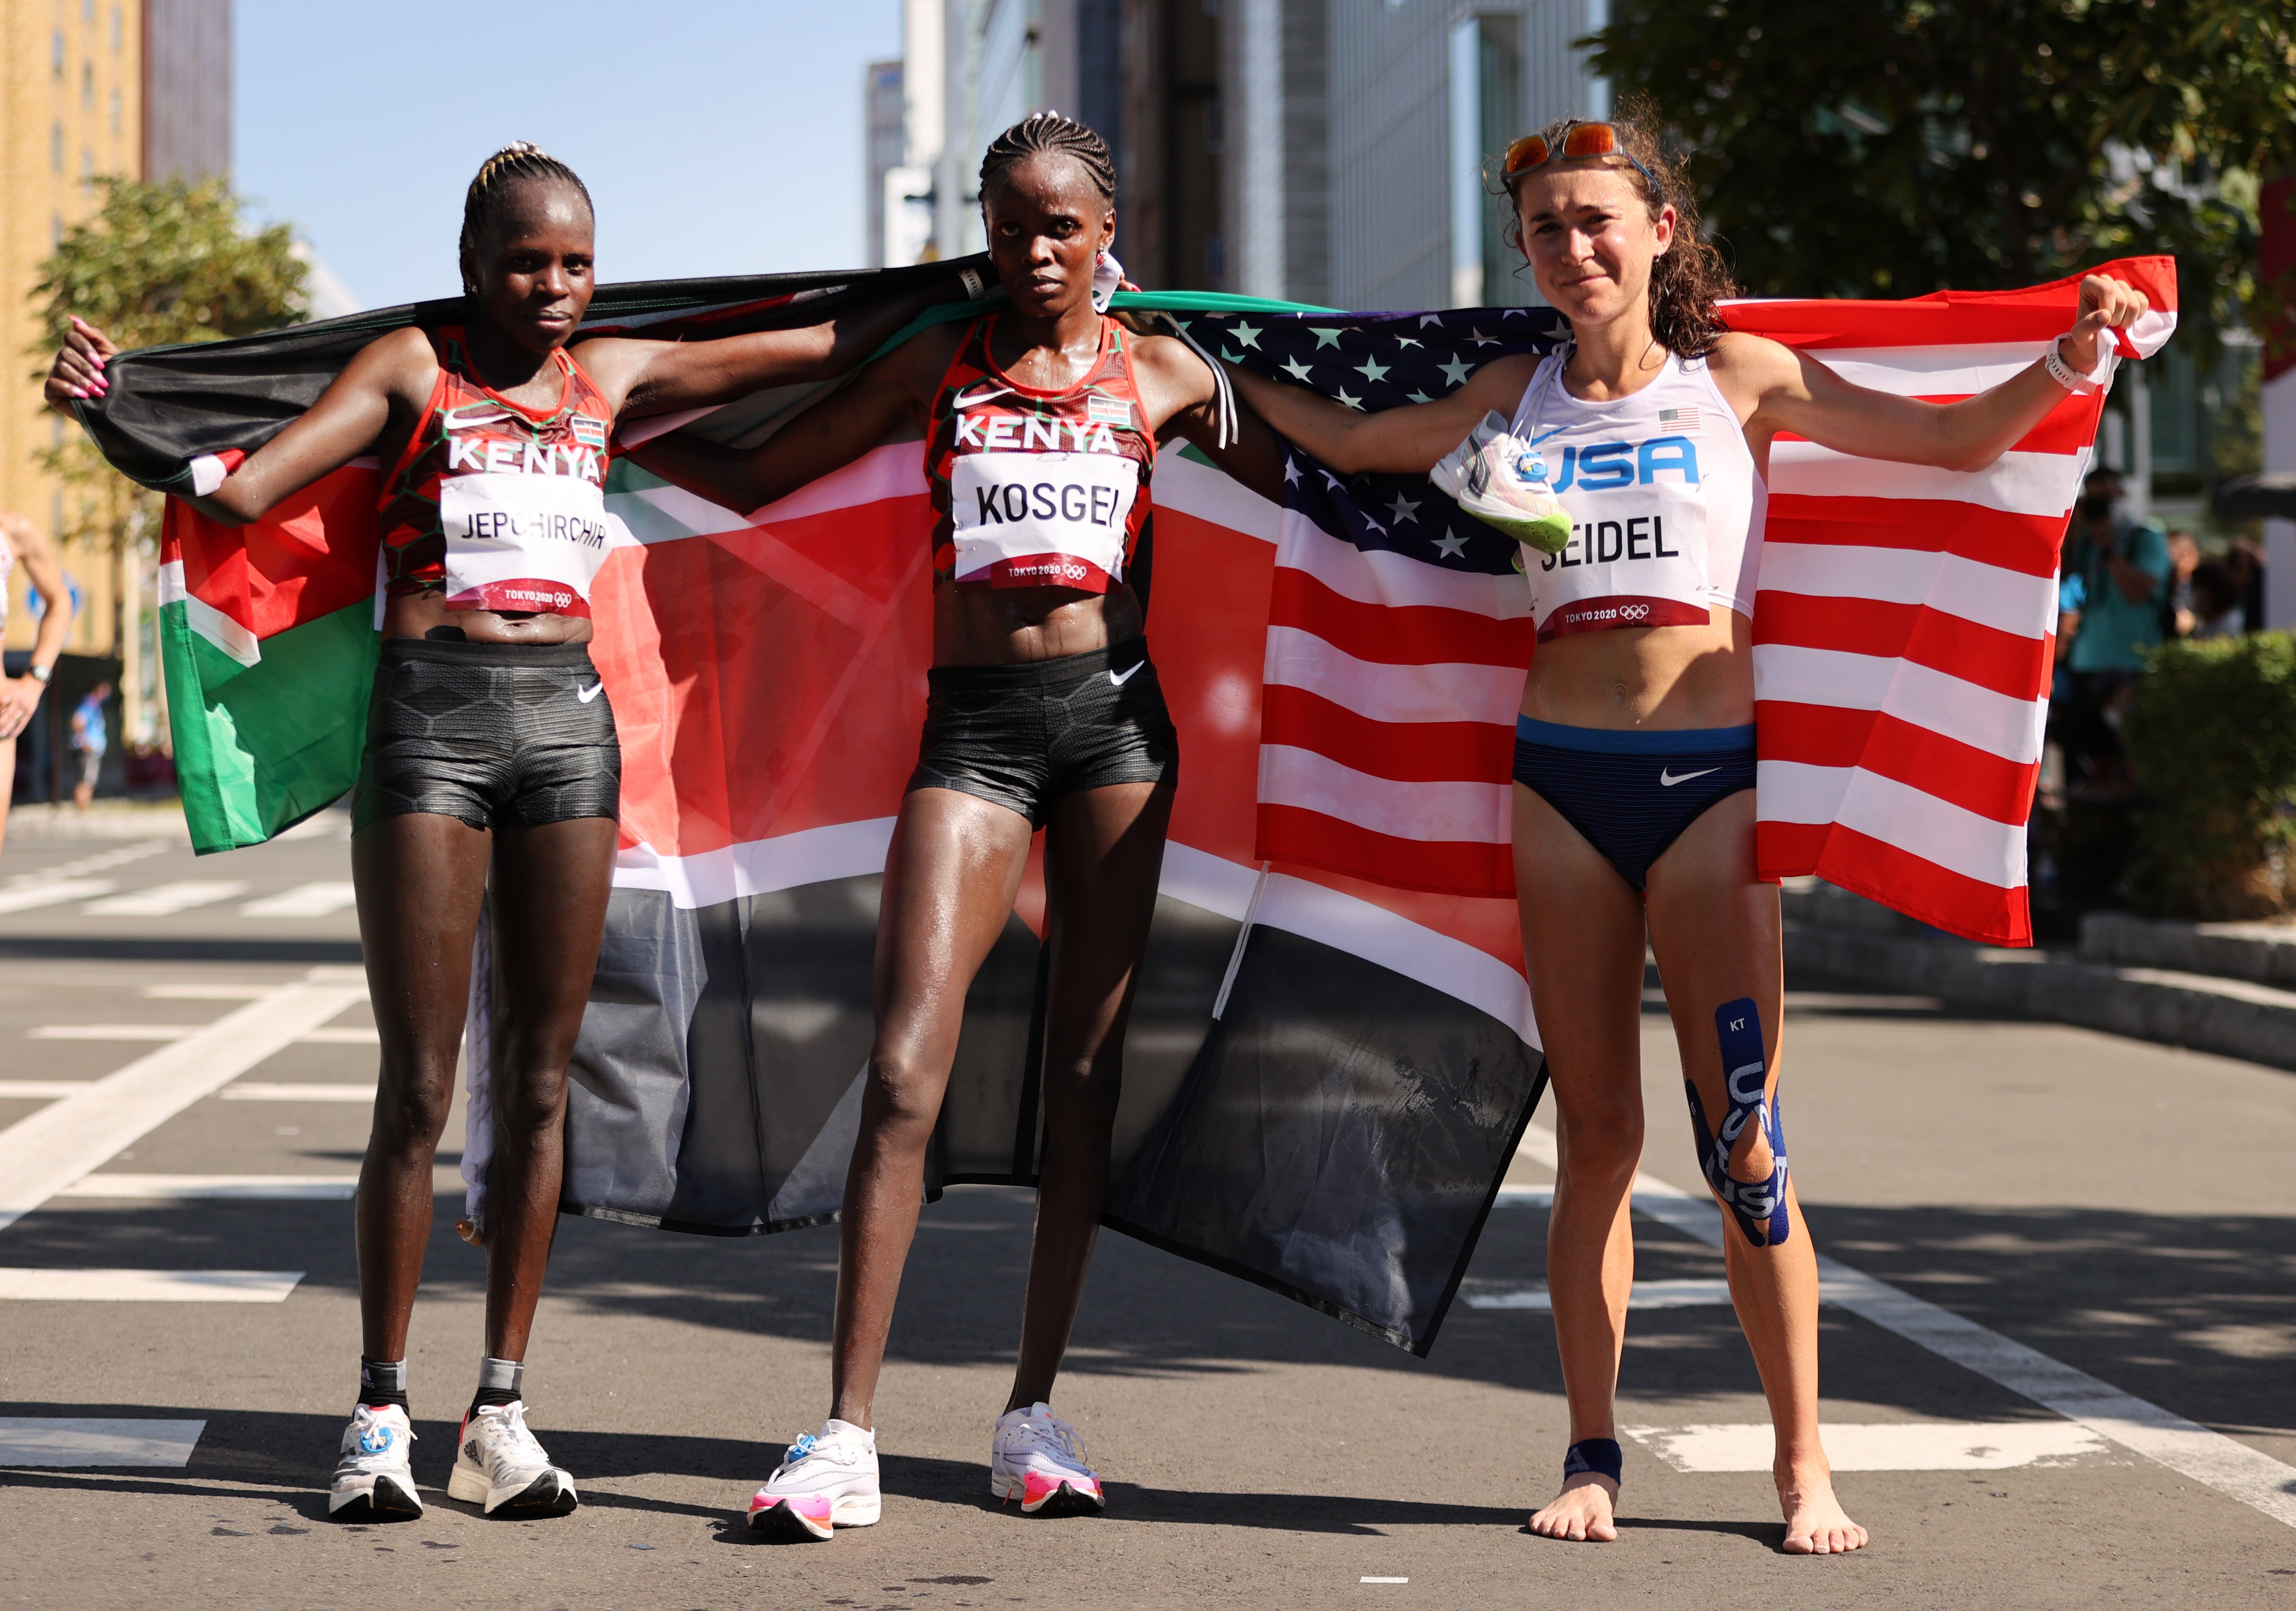 Gold medalist Peres Jepchirchir of Team Kenya, silver medalist Brigid Kosgei of Team Kenya and bronze medalist Molly Seidel of Team United States pose for photos after finishing the Women's Marathon Final on day fifteen of the Tokyo 2020 Olympic Games